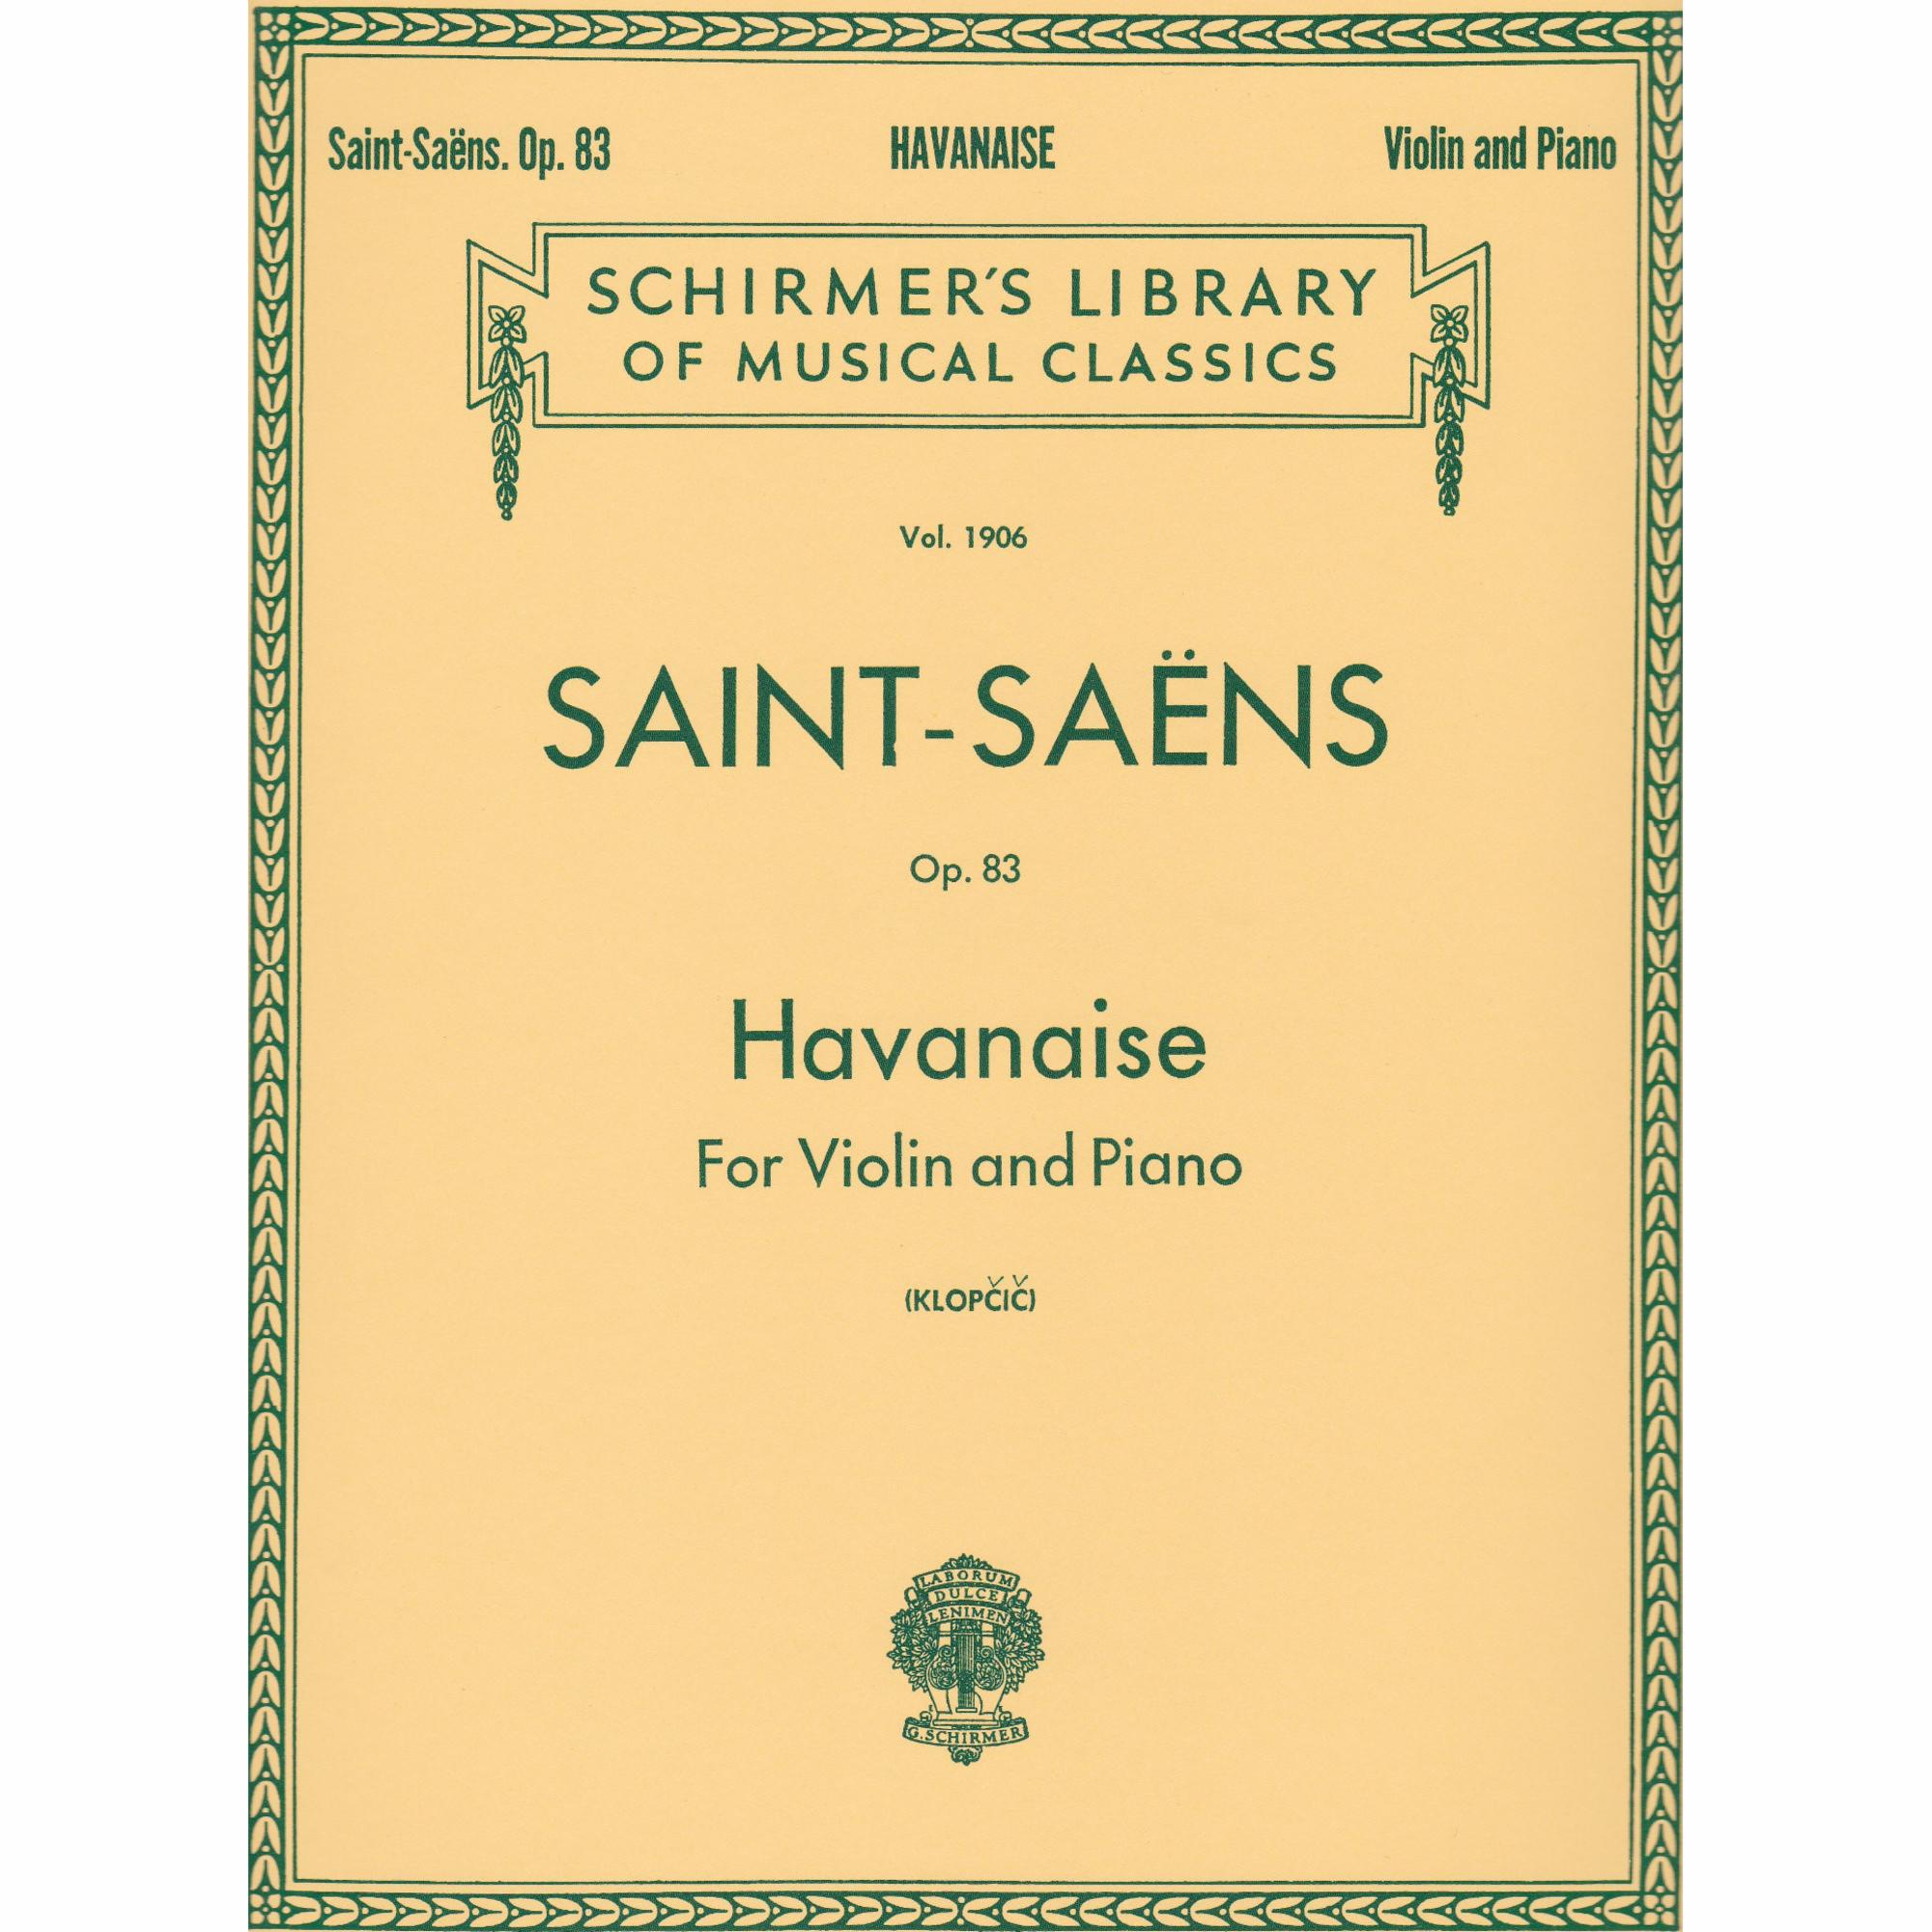 Saint-Saens -- Havanaise, Op. 83 for Violin and Piano